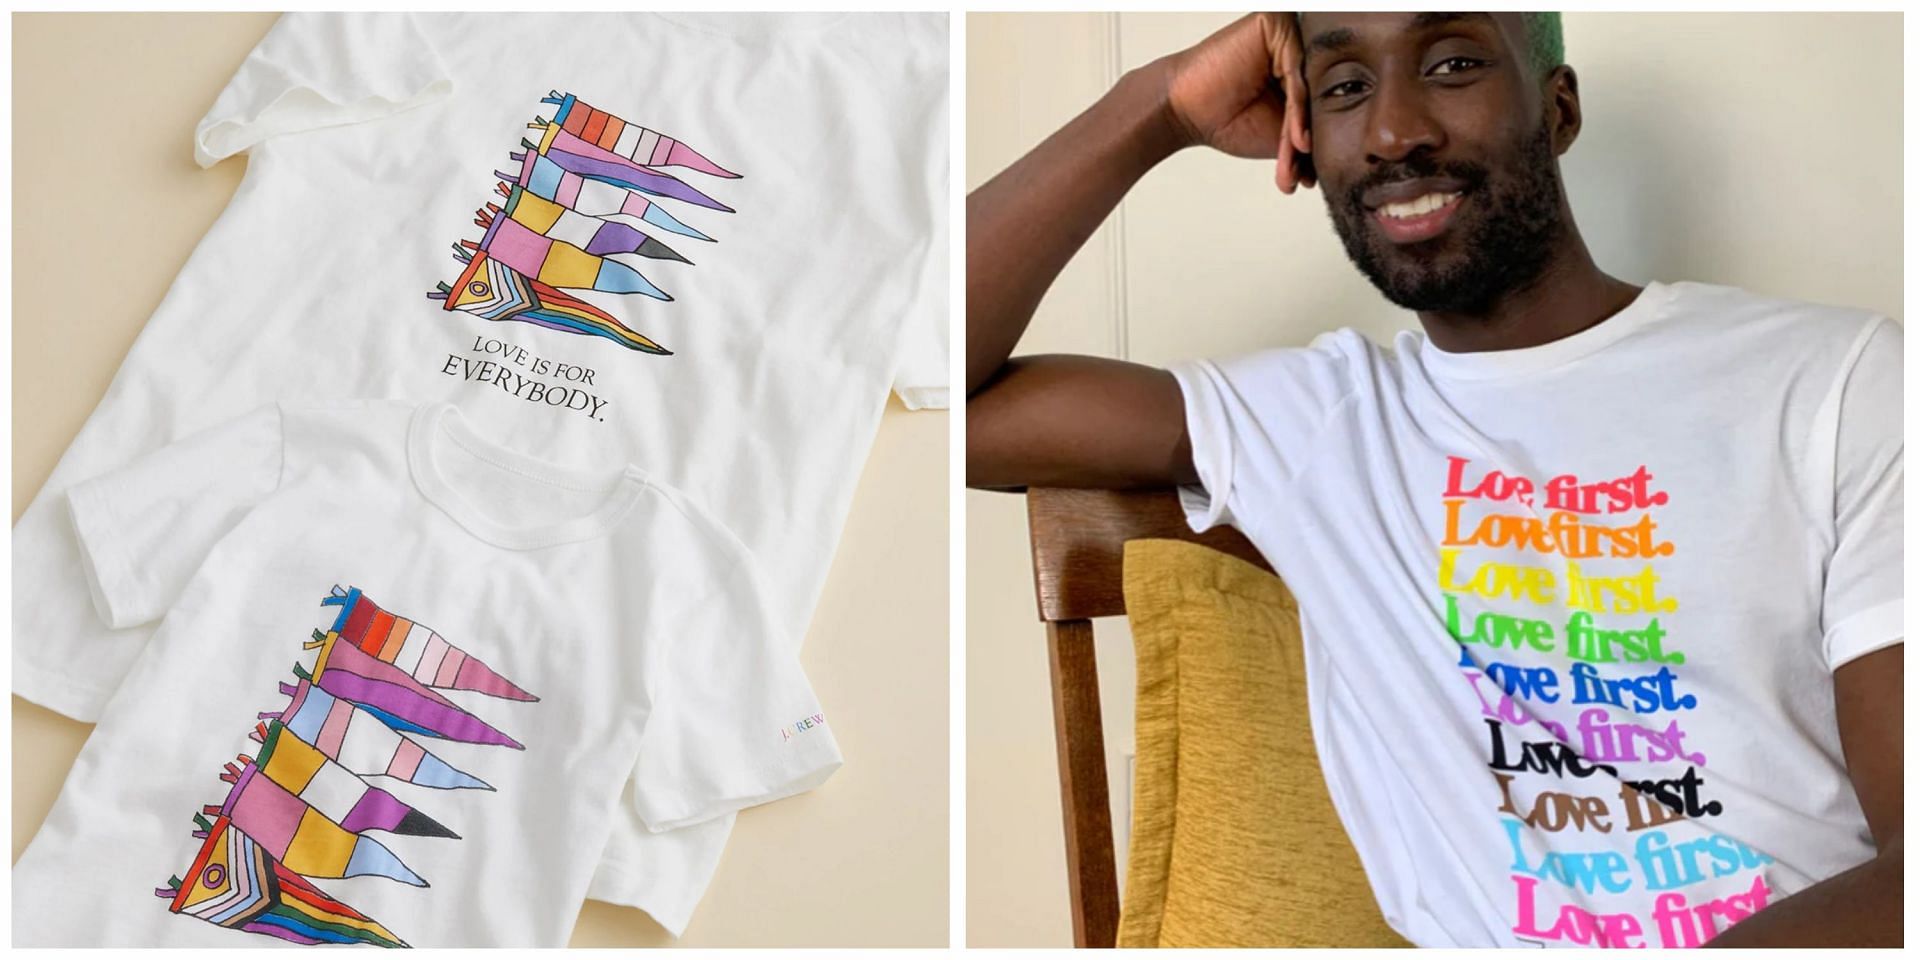 Social media users left infuriated once again as another clothing brand launches LGBTQ merchandise ahead of Pride Month for toddlers: Reactions explored. (Image via JCrew)